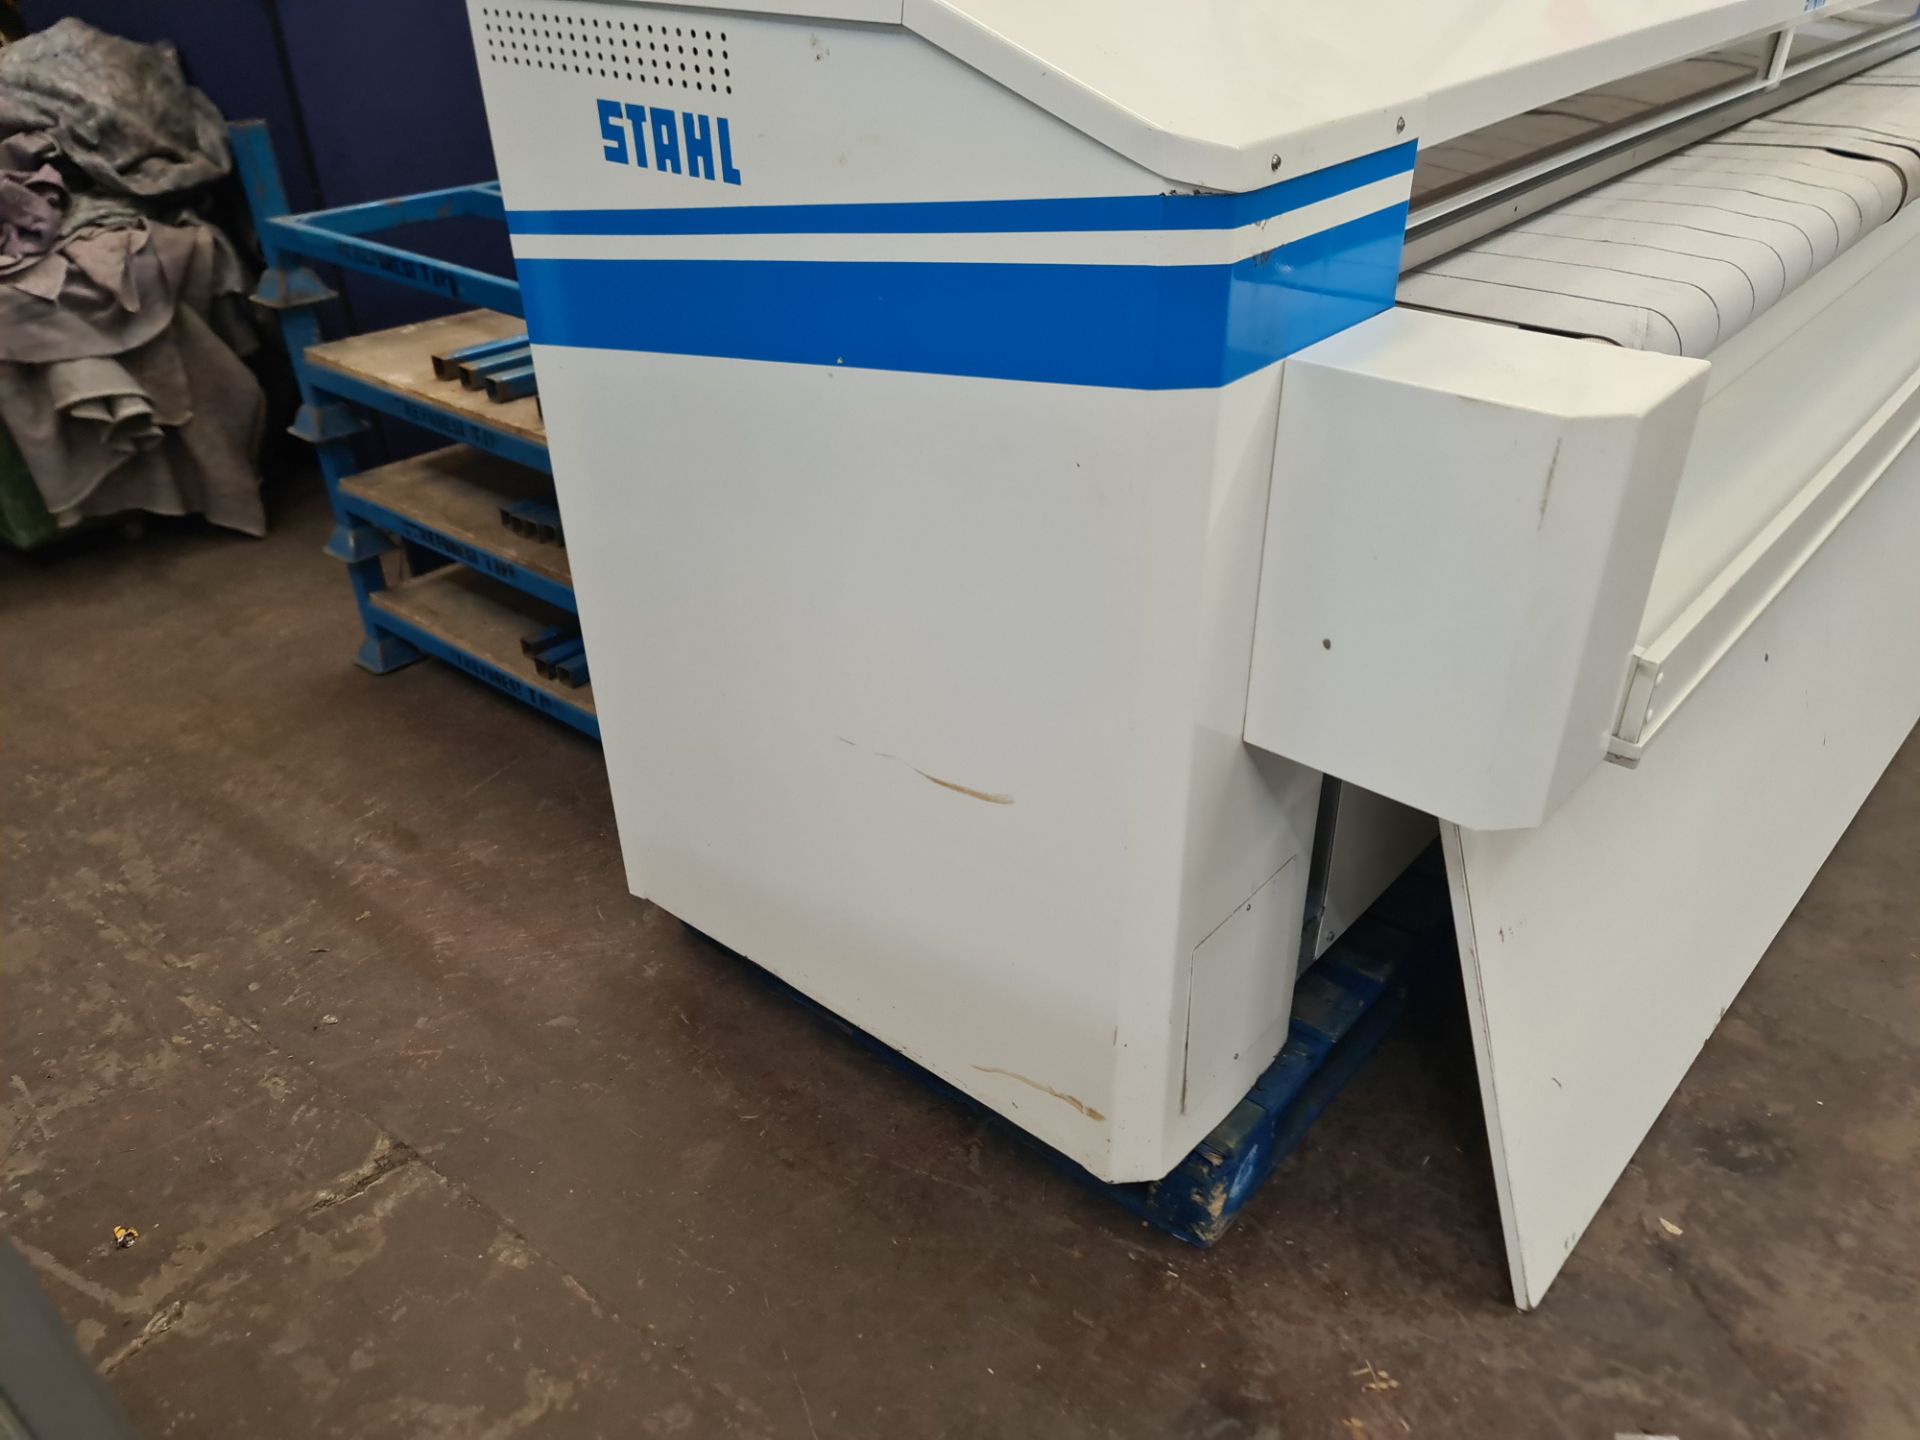 2017 Stahl flatwork ironer Super Chest ironing system, type MC 600/3000 D - Image 10 of 20